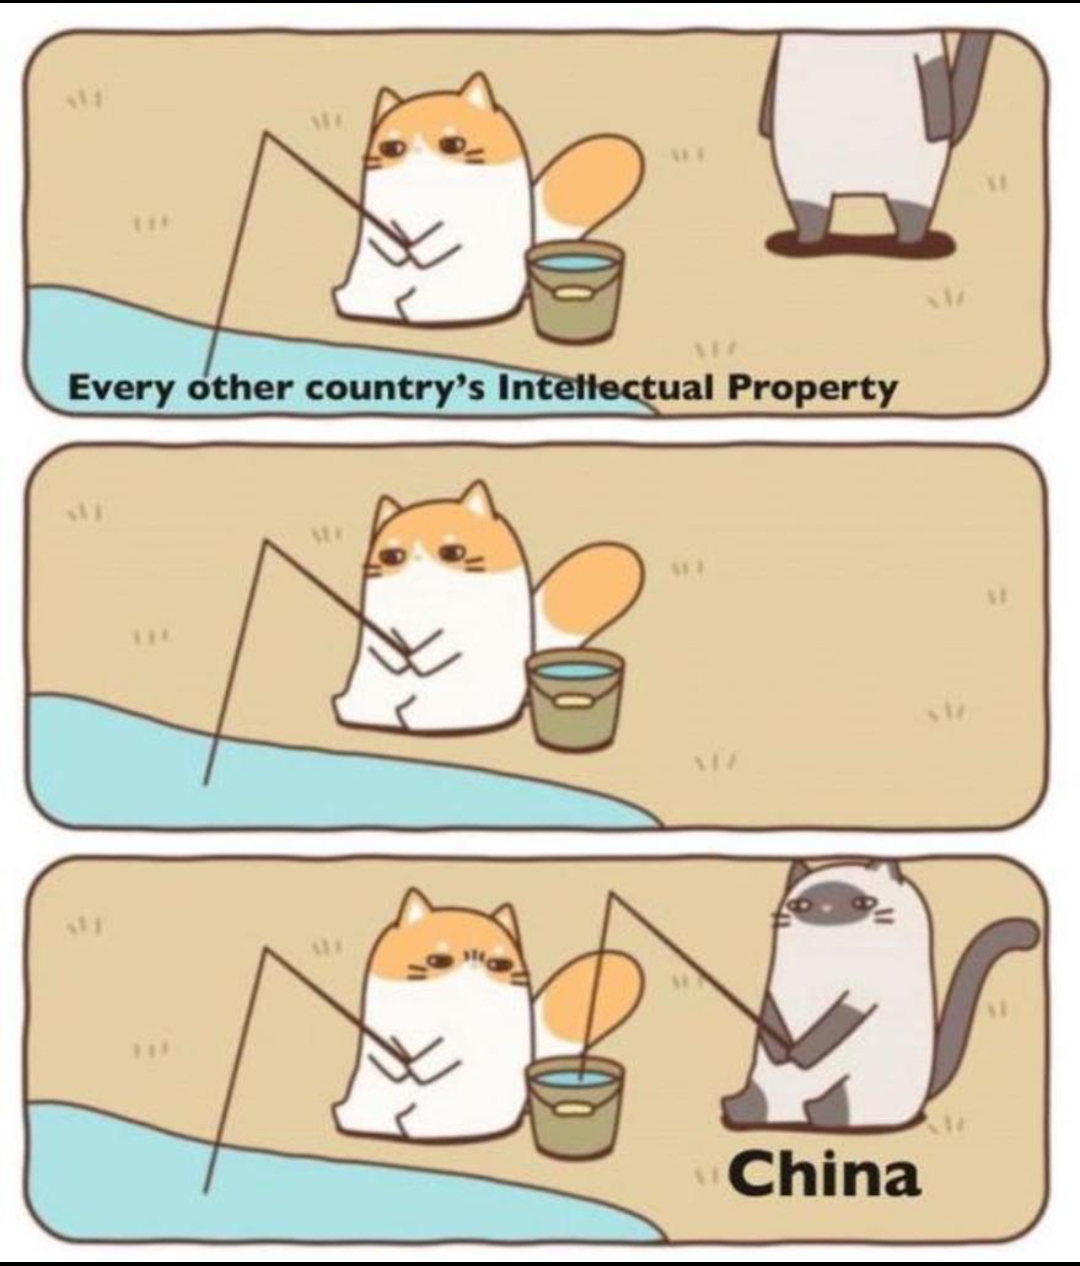 cat fishing template - Every other country's Intellectual Property China